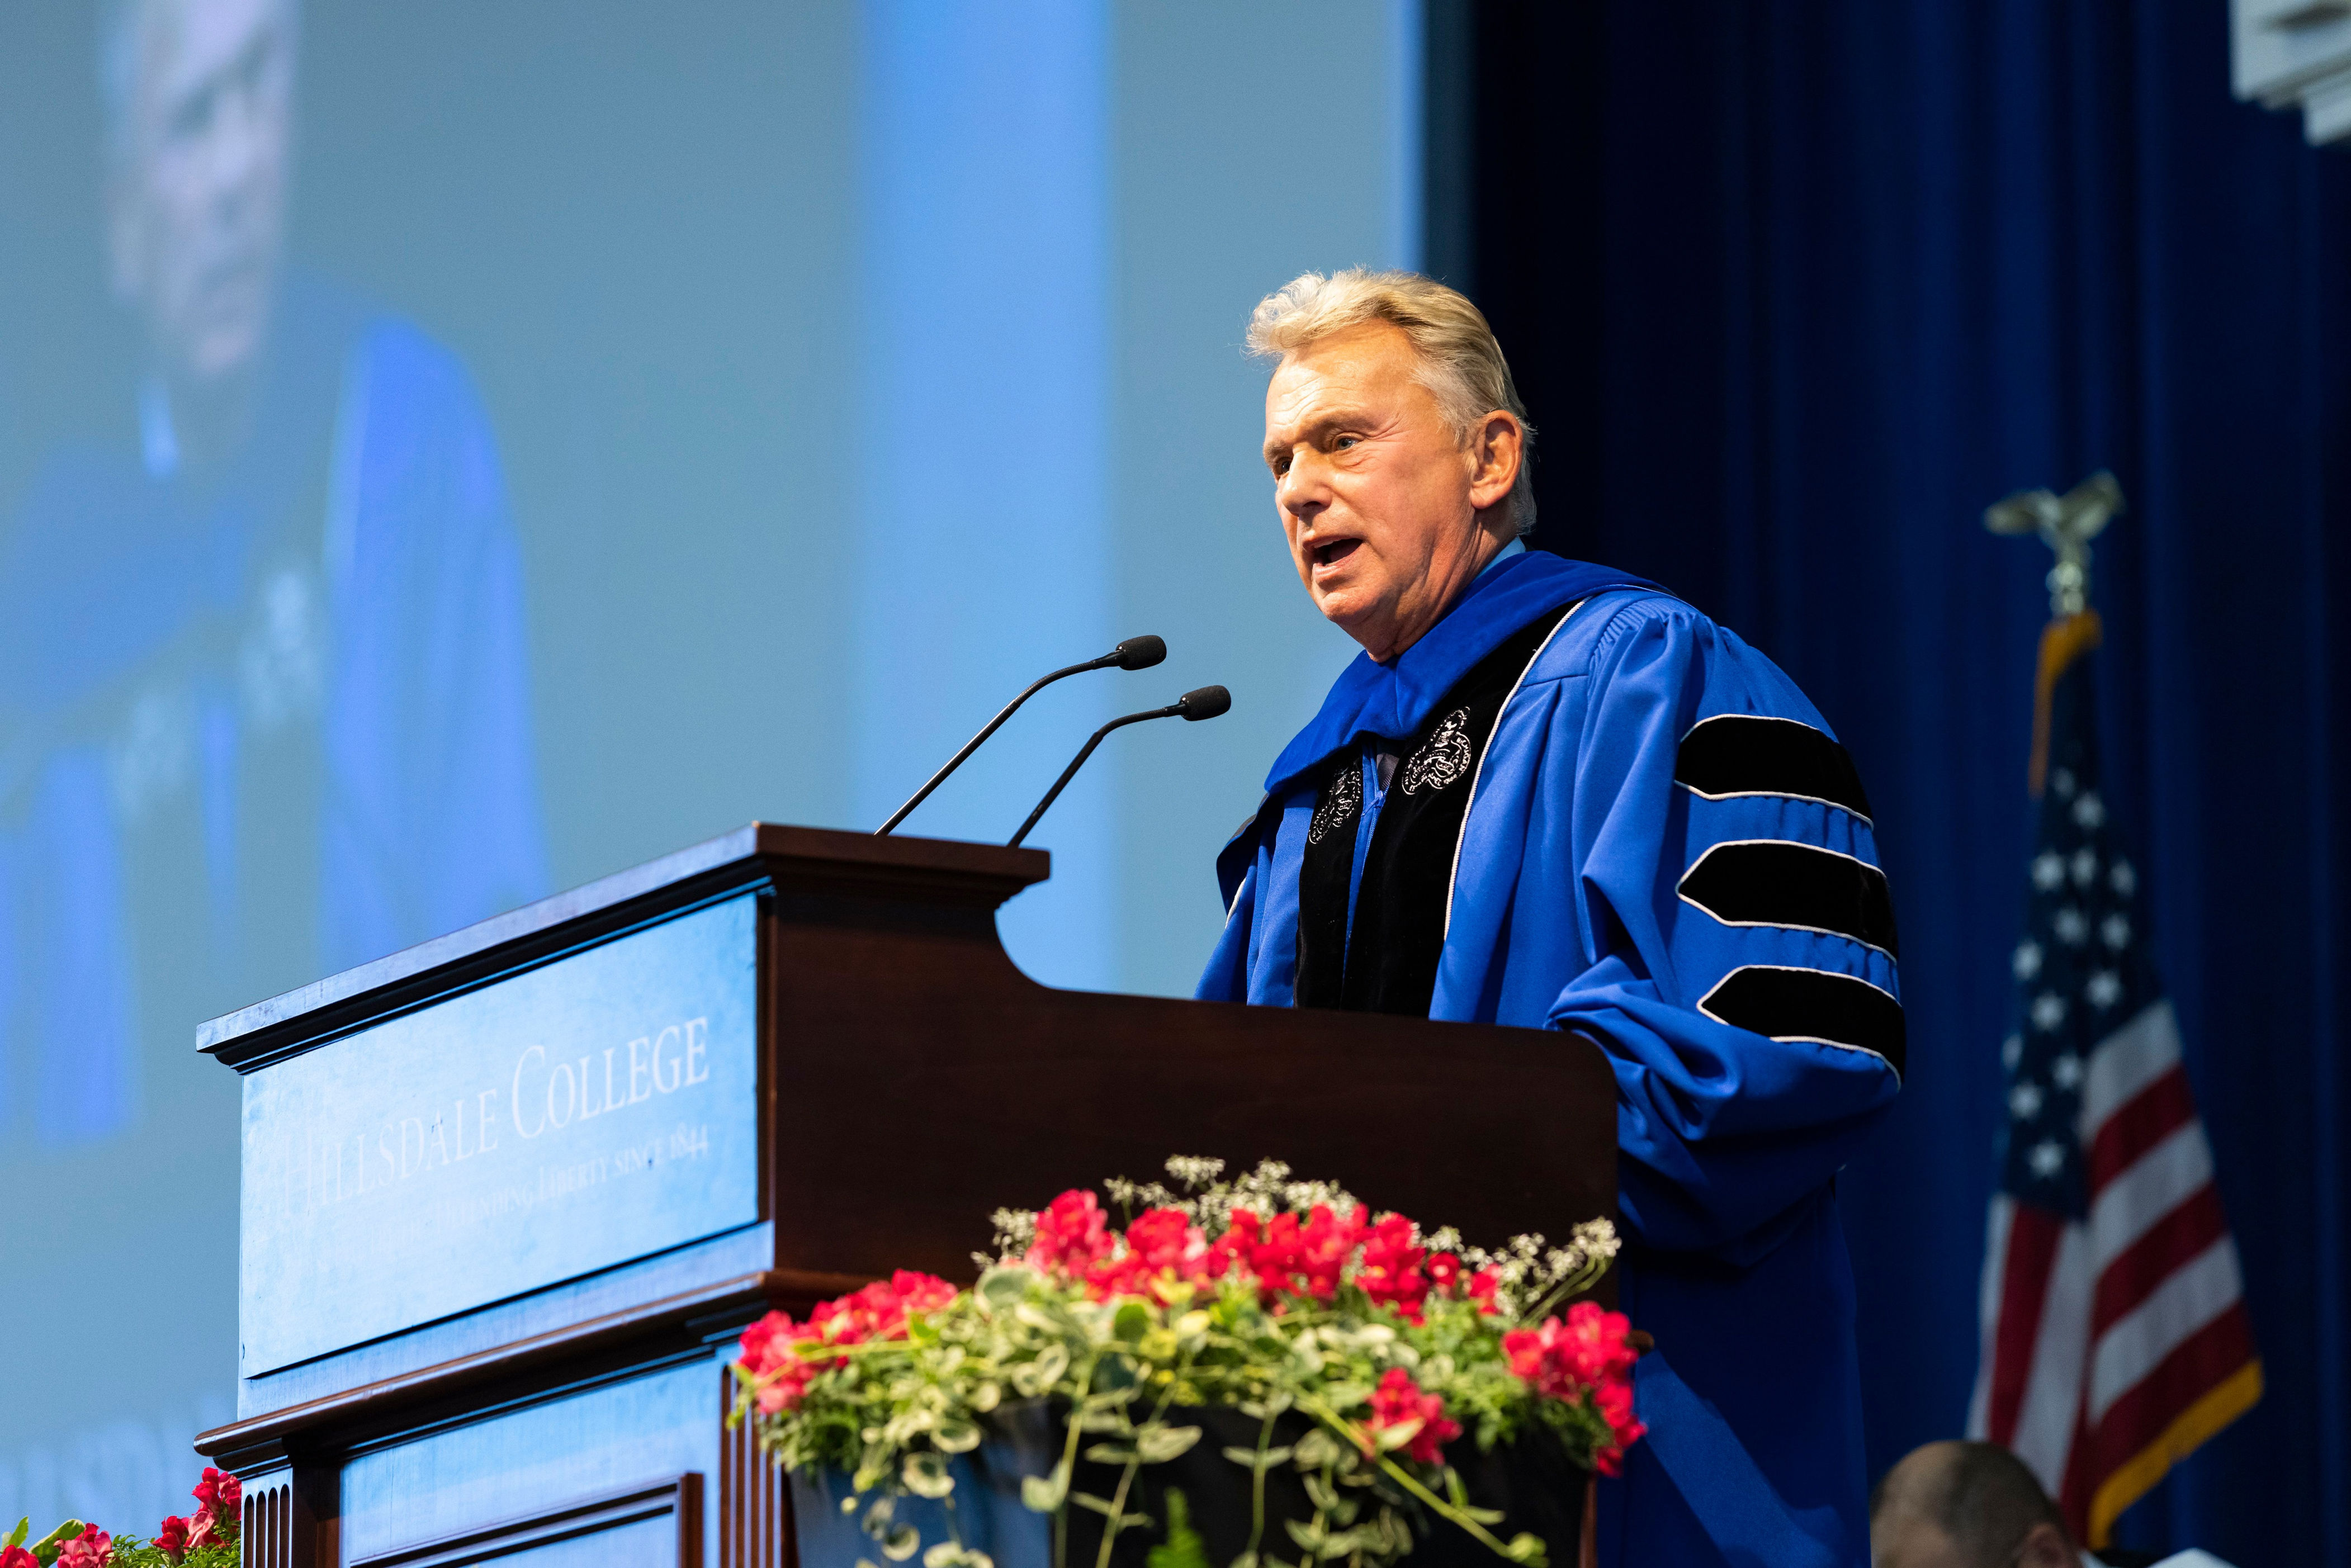 Pat Sajak to give commencement ceremony address to Hillsdale College